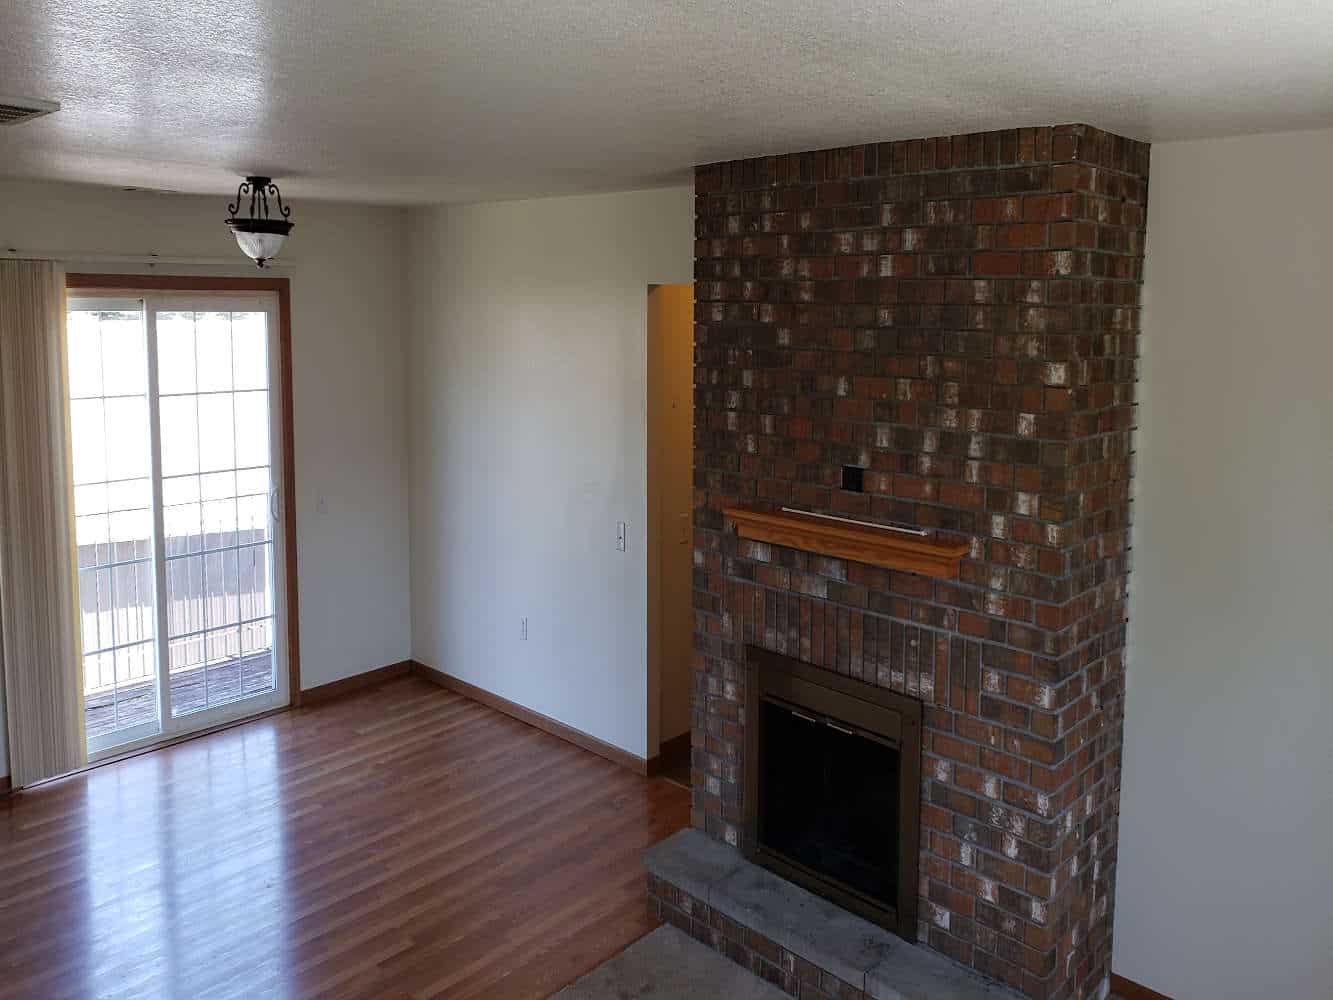 401 Hillcrest Drive fireplace in living room